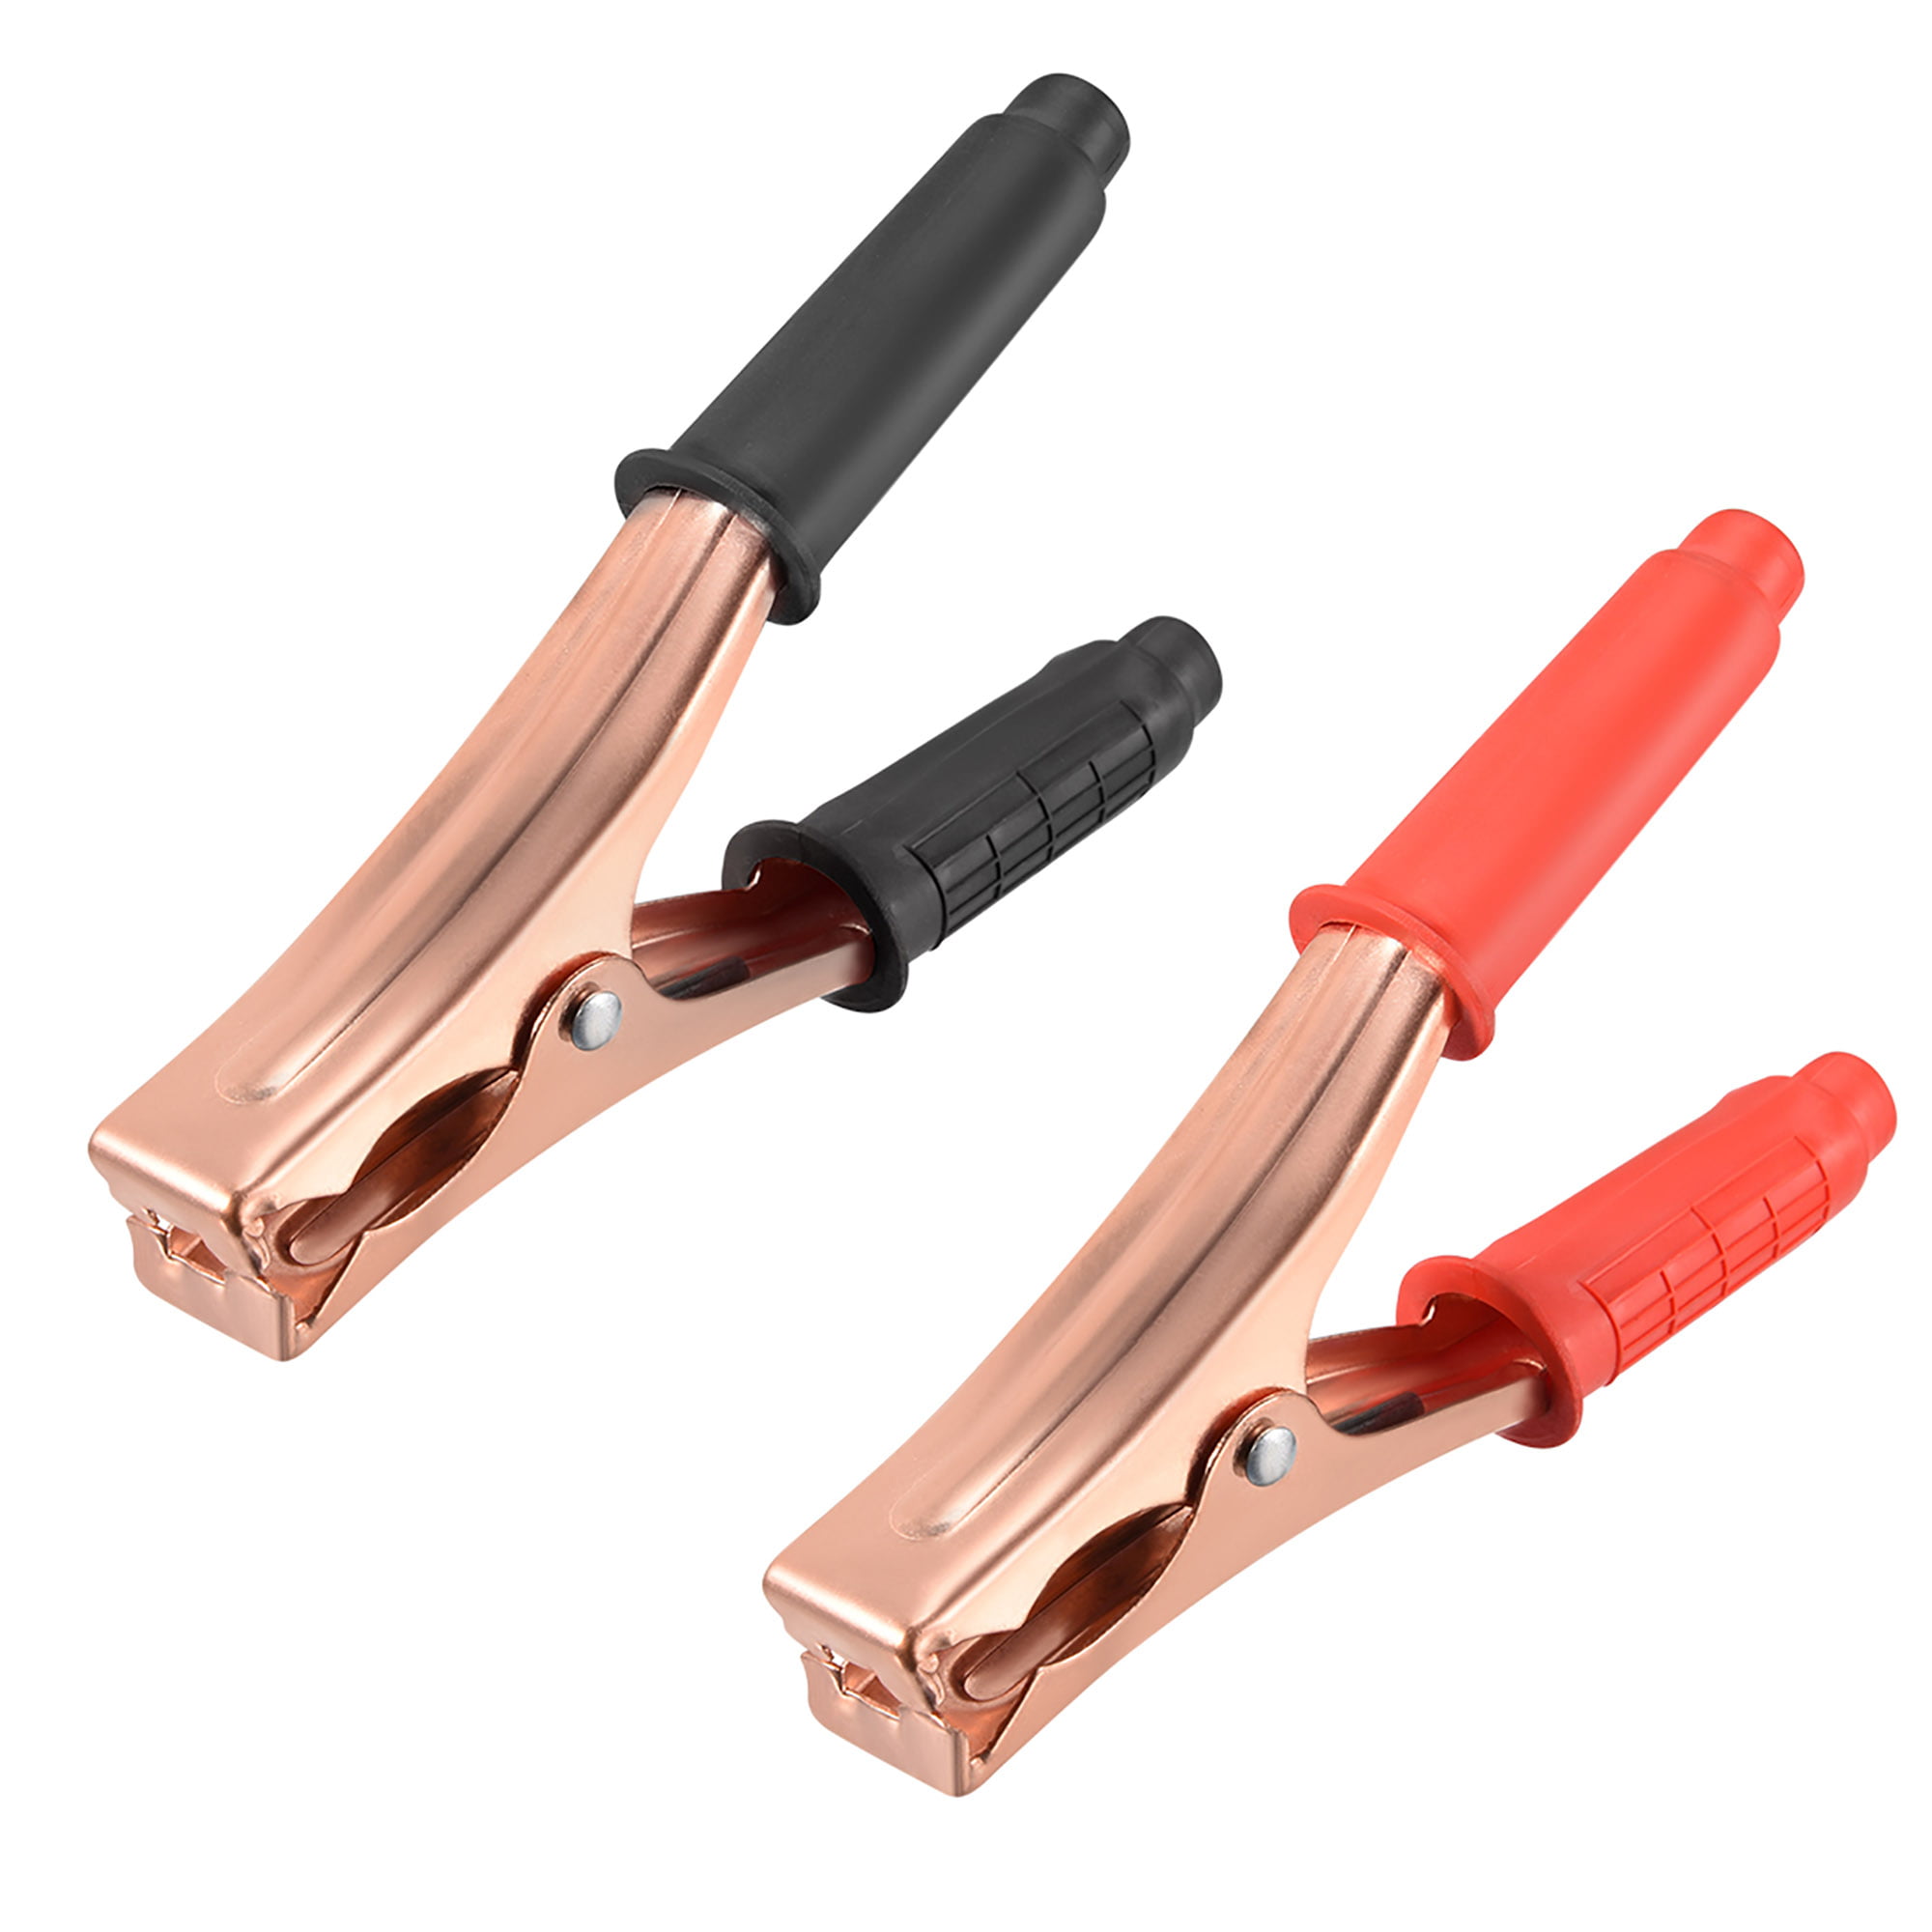 Details about   2pcs Copper Insulated Alligator Clips Red Black Testing Clamps For Car Battery 